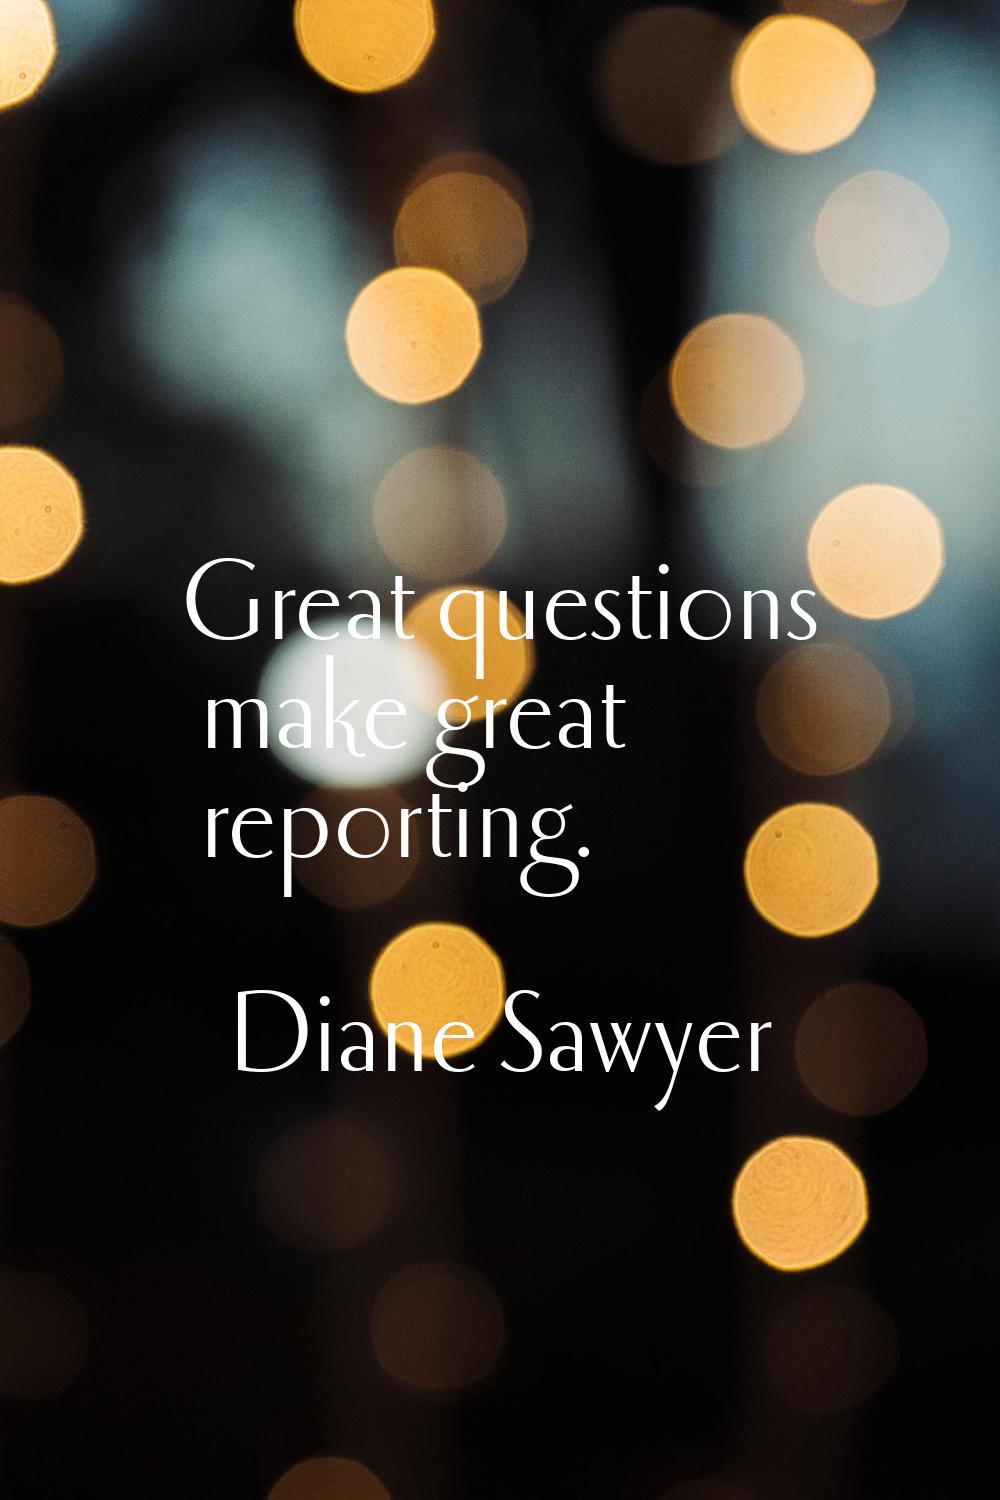 Great questions make great reporting.